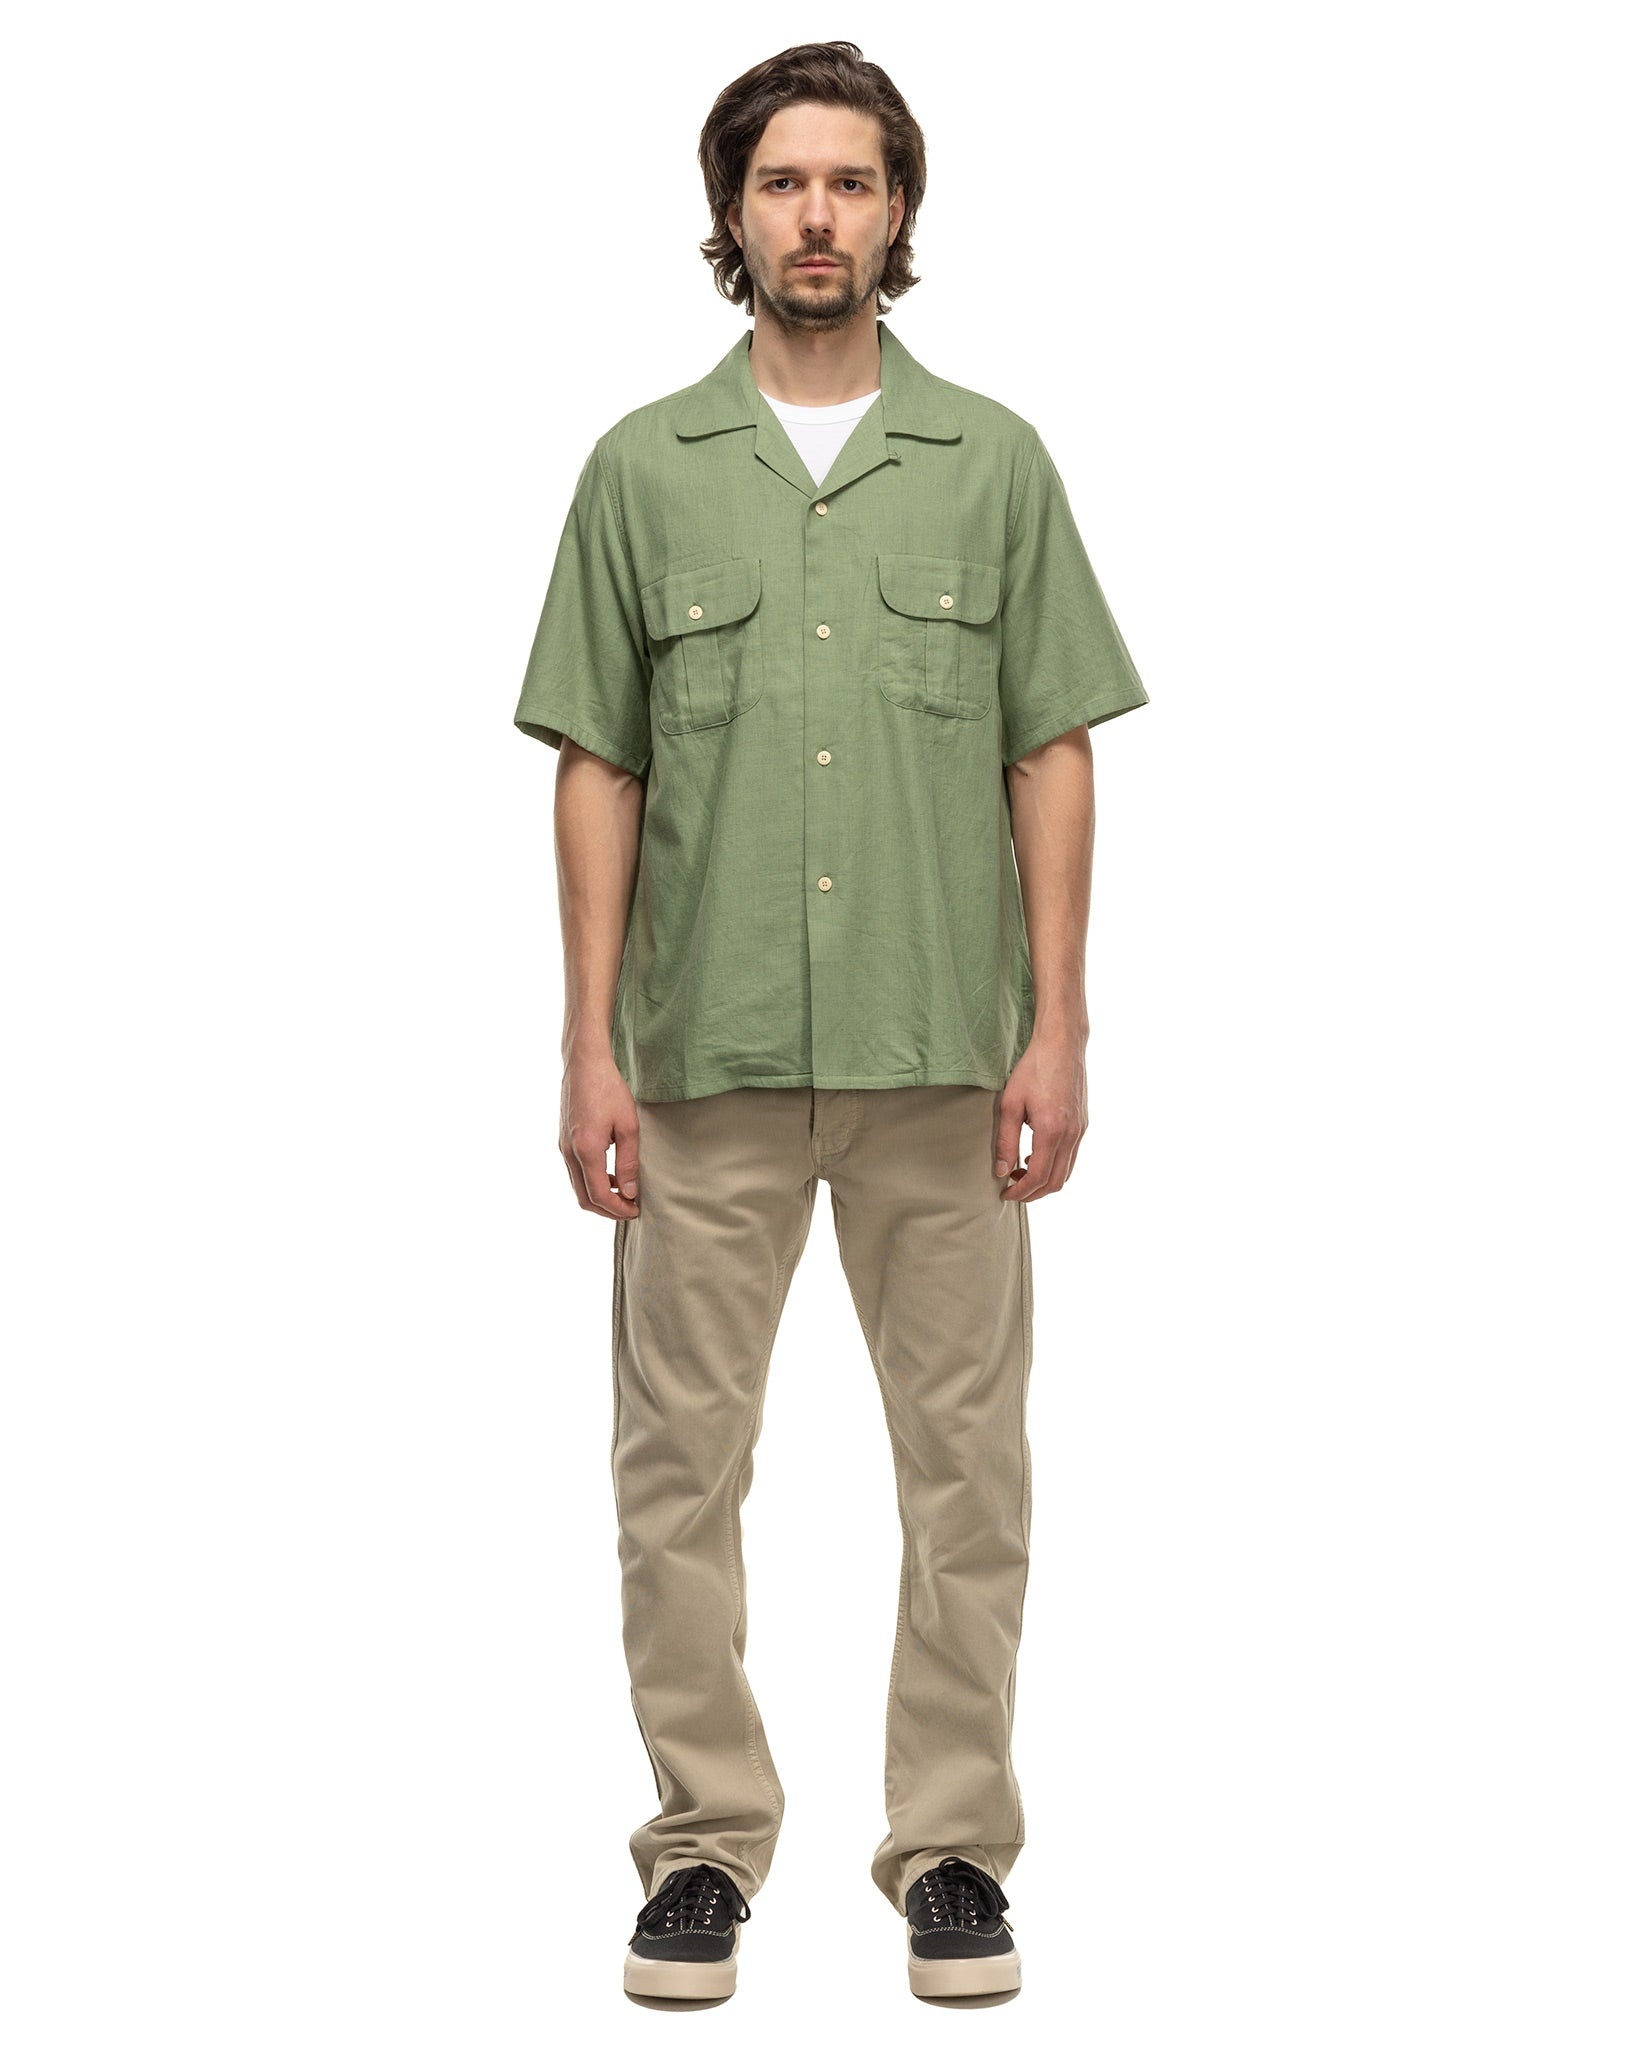 Keesey G.S. Shirt S/S Green - 2